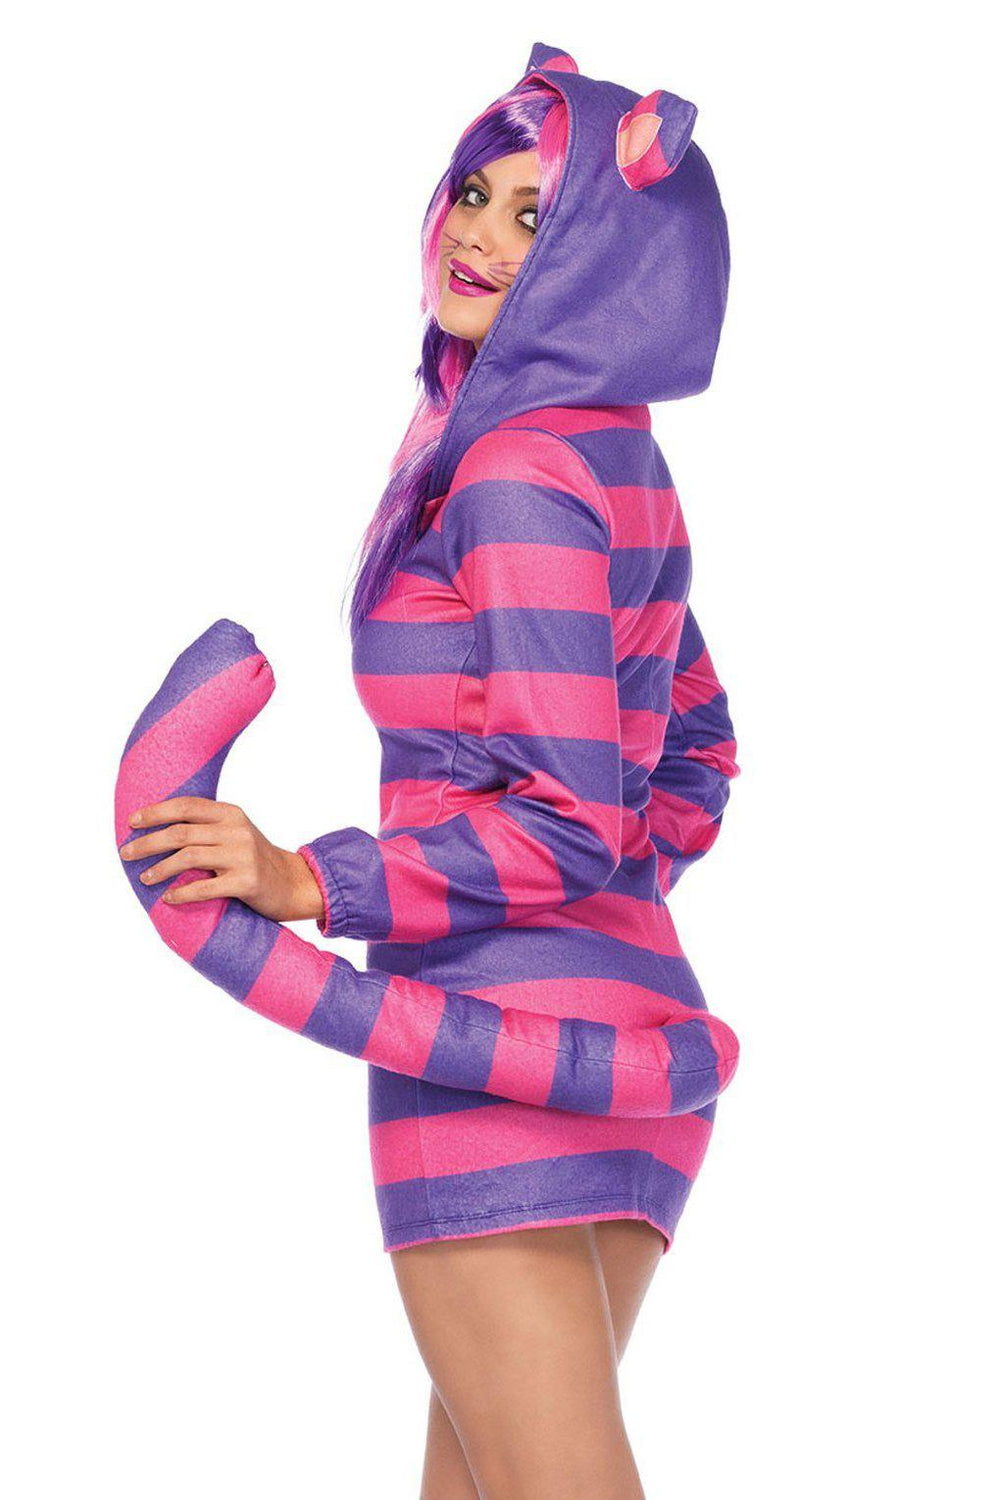 Sexy Cheshire Cat Costume Dress-Fairytale Costumes-Leg Avenue-SEXYSHOES.COM